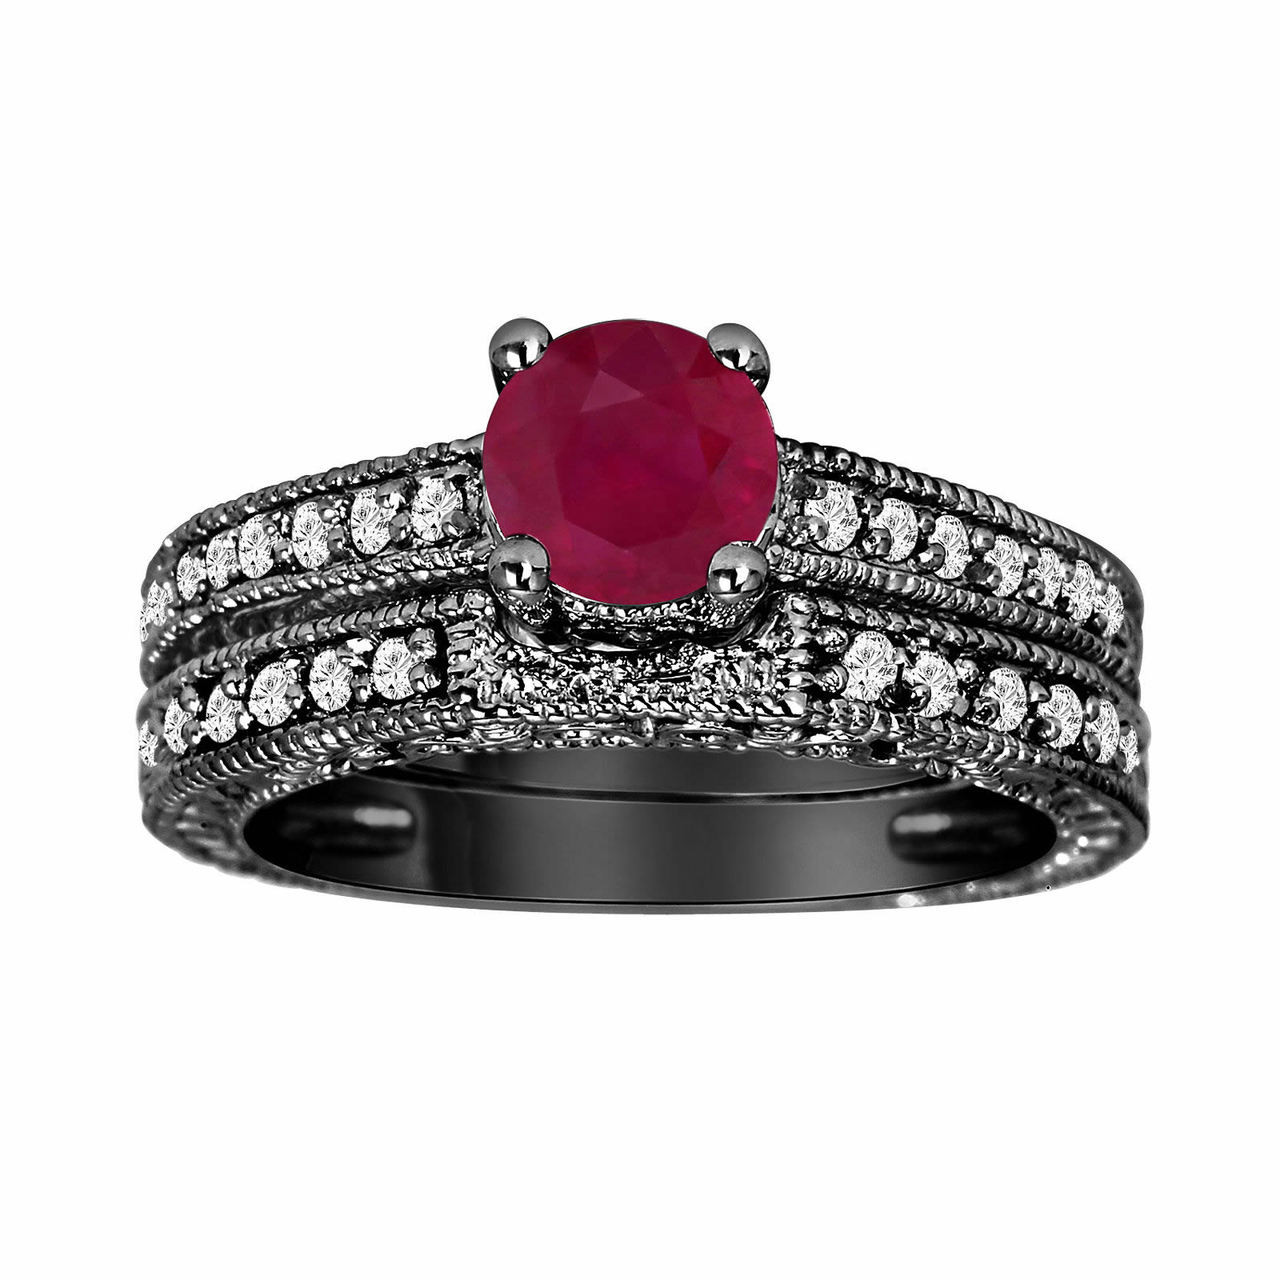 Ruby and Diamond Wedding Ring | Vintage Style Bands